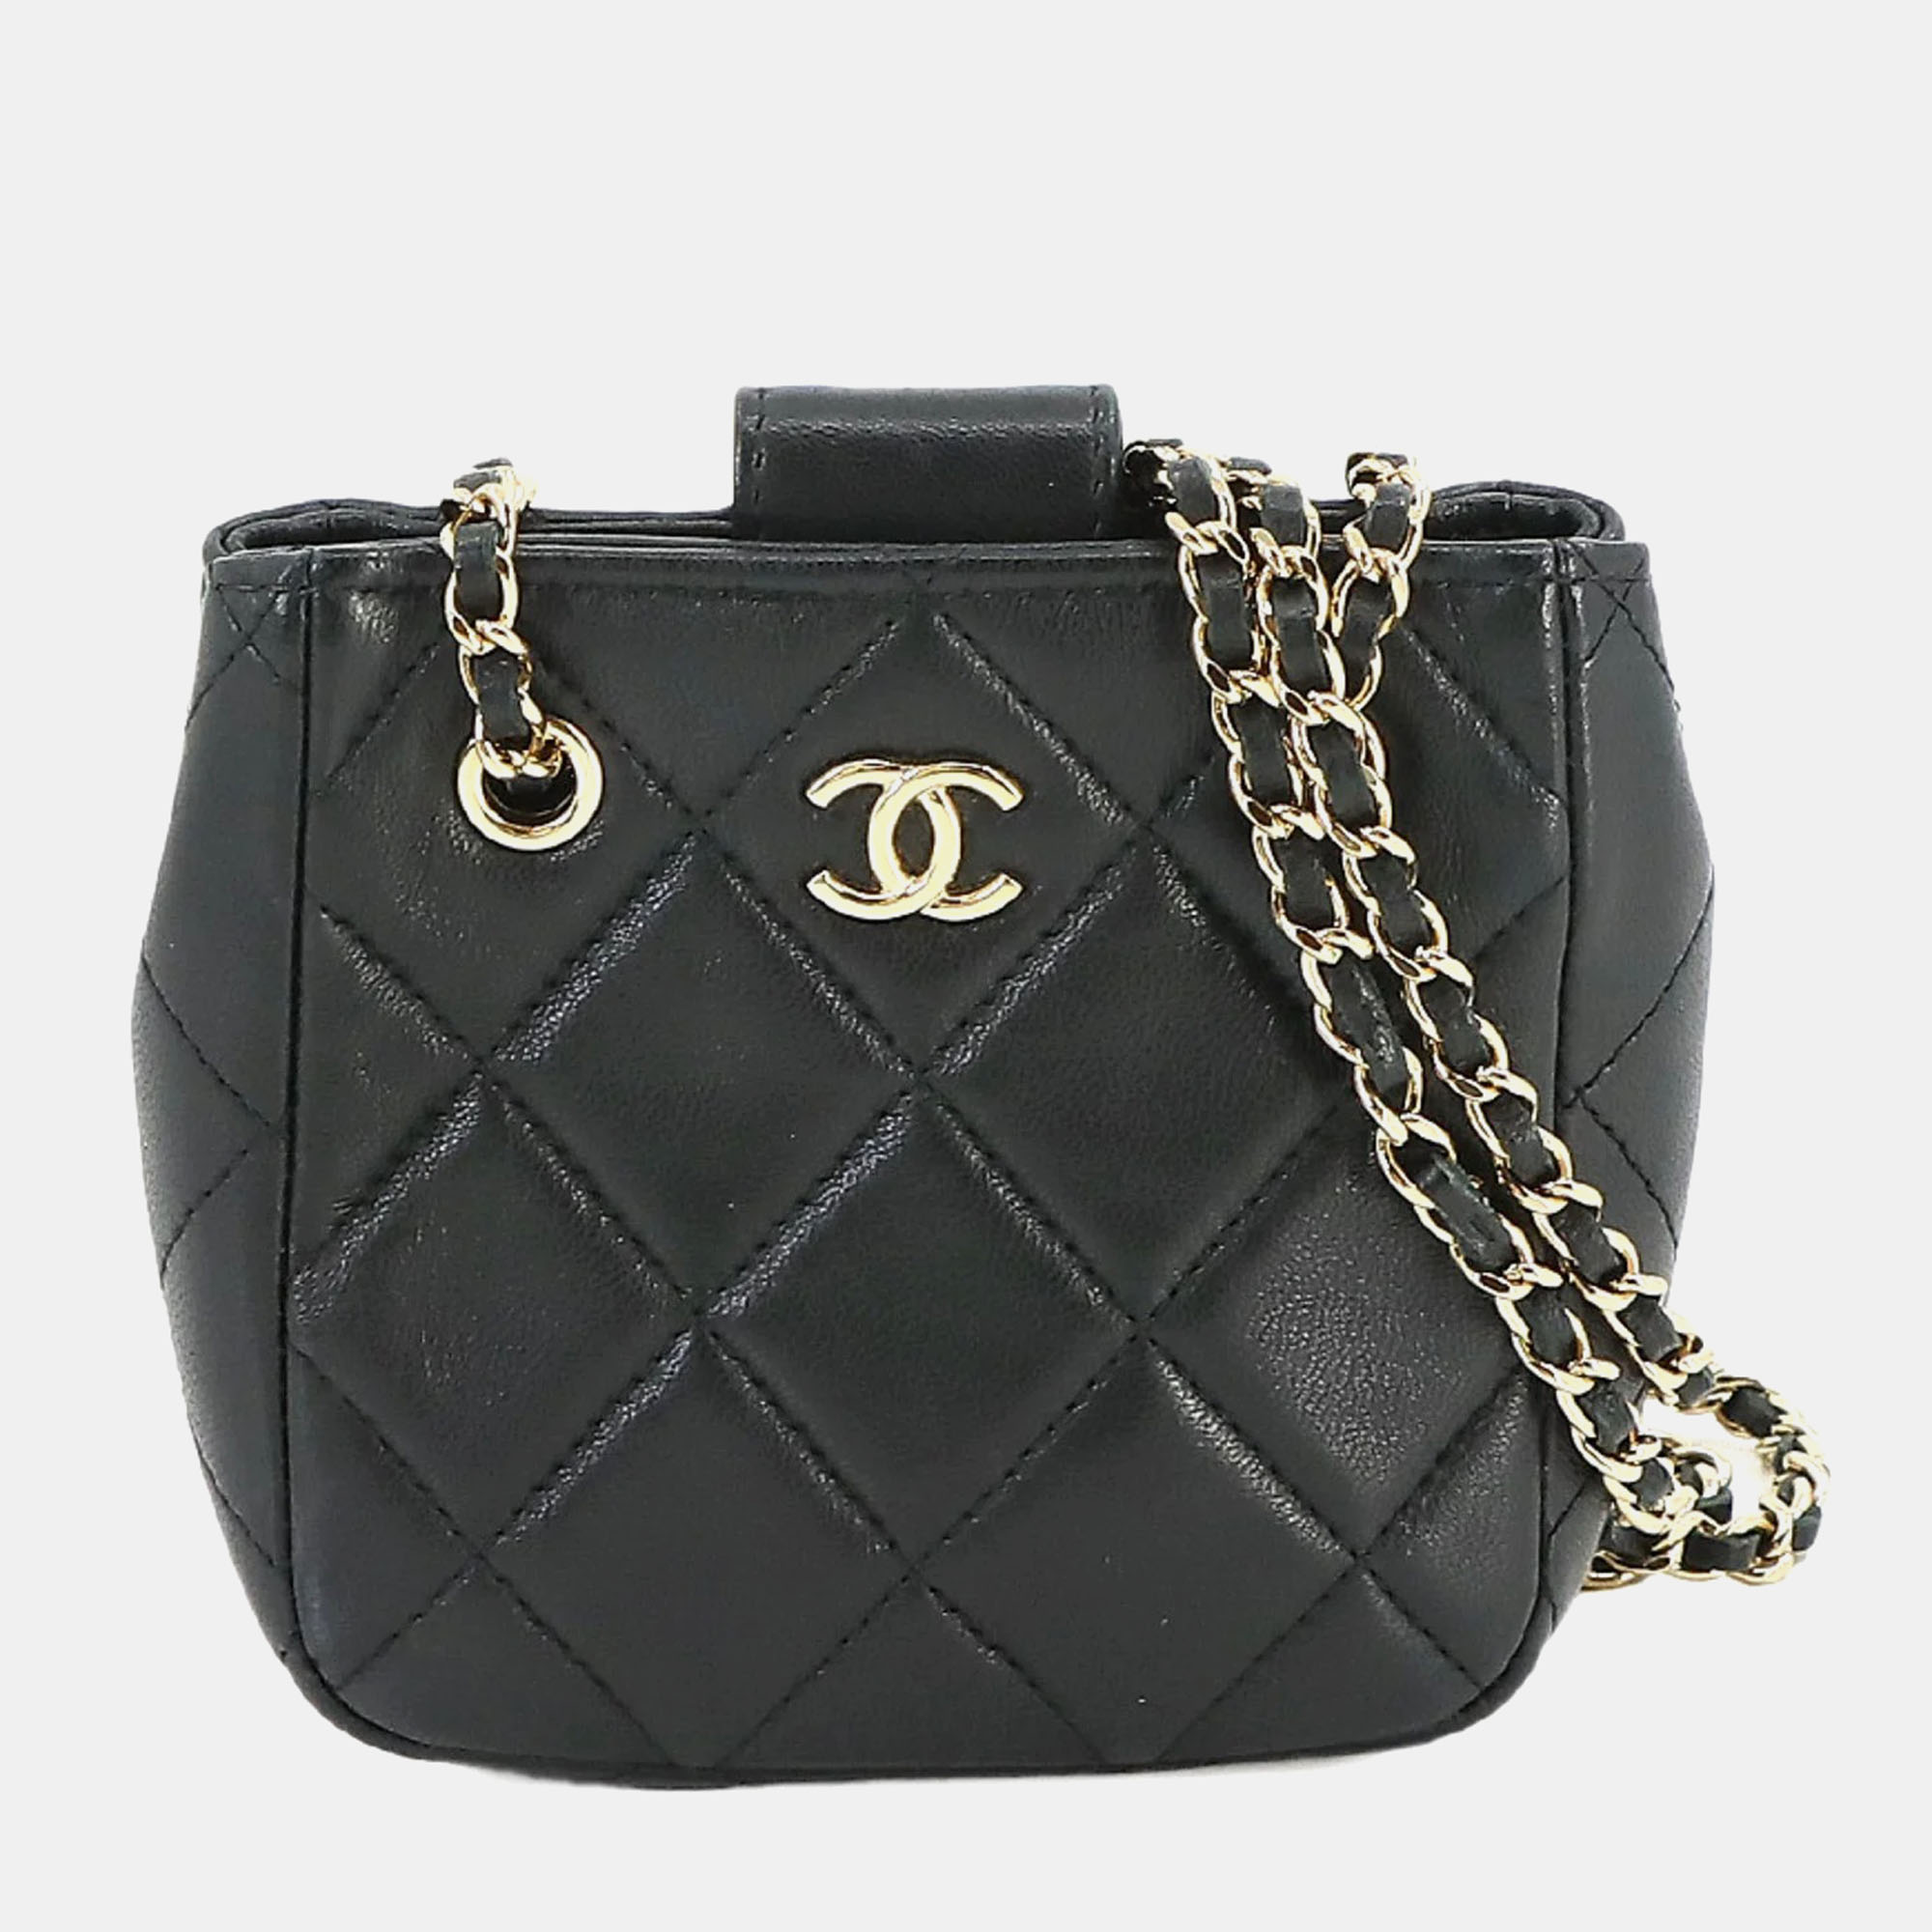 Chanel black quilted lambskin mini cc square clutch with chain